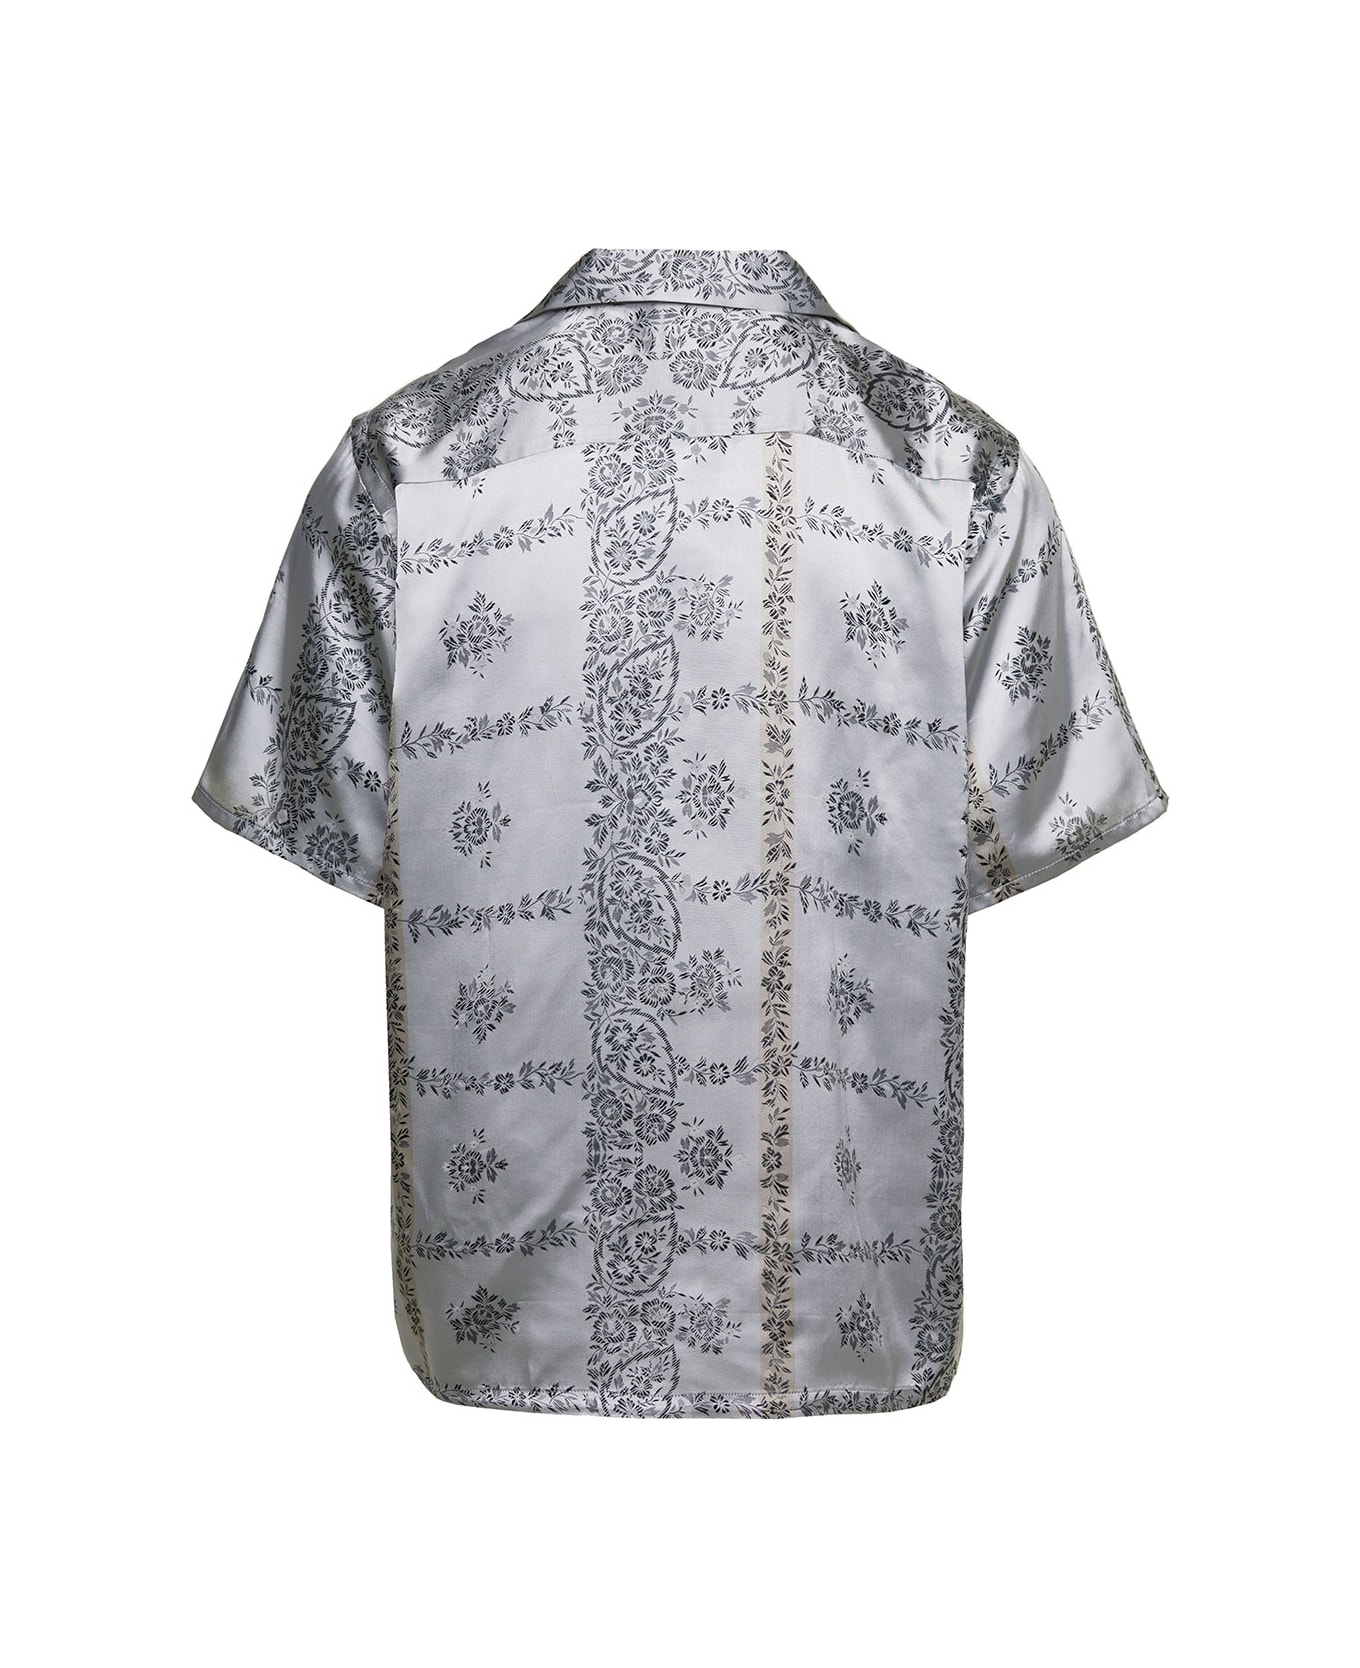 Needles Silver Bowling Shirt With All-over Floreal Print In Cupro Man - Grey